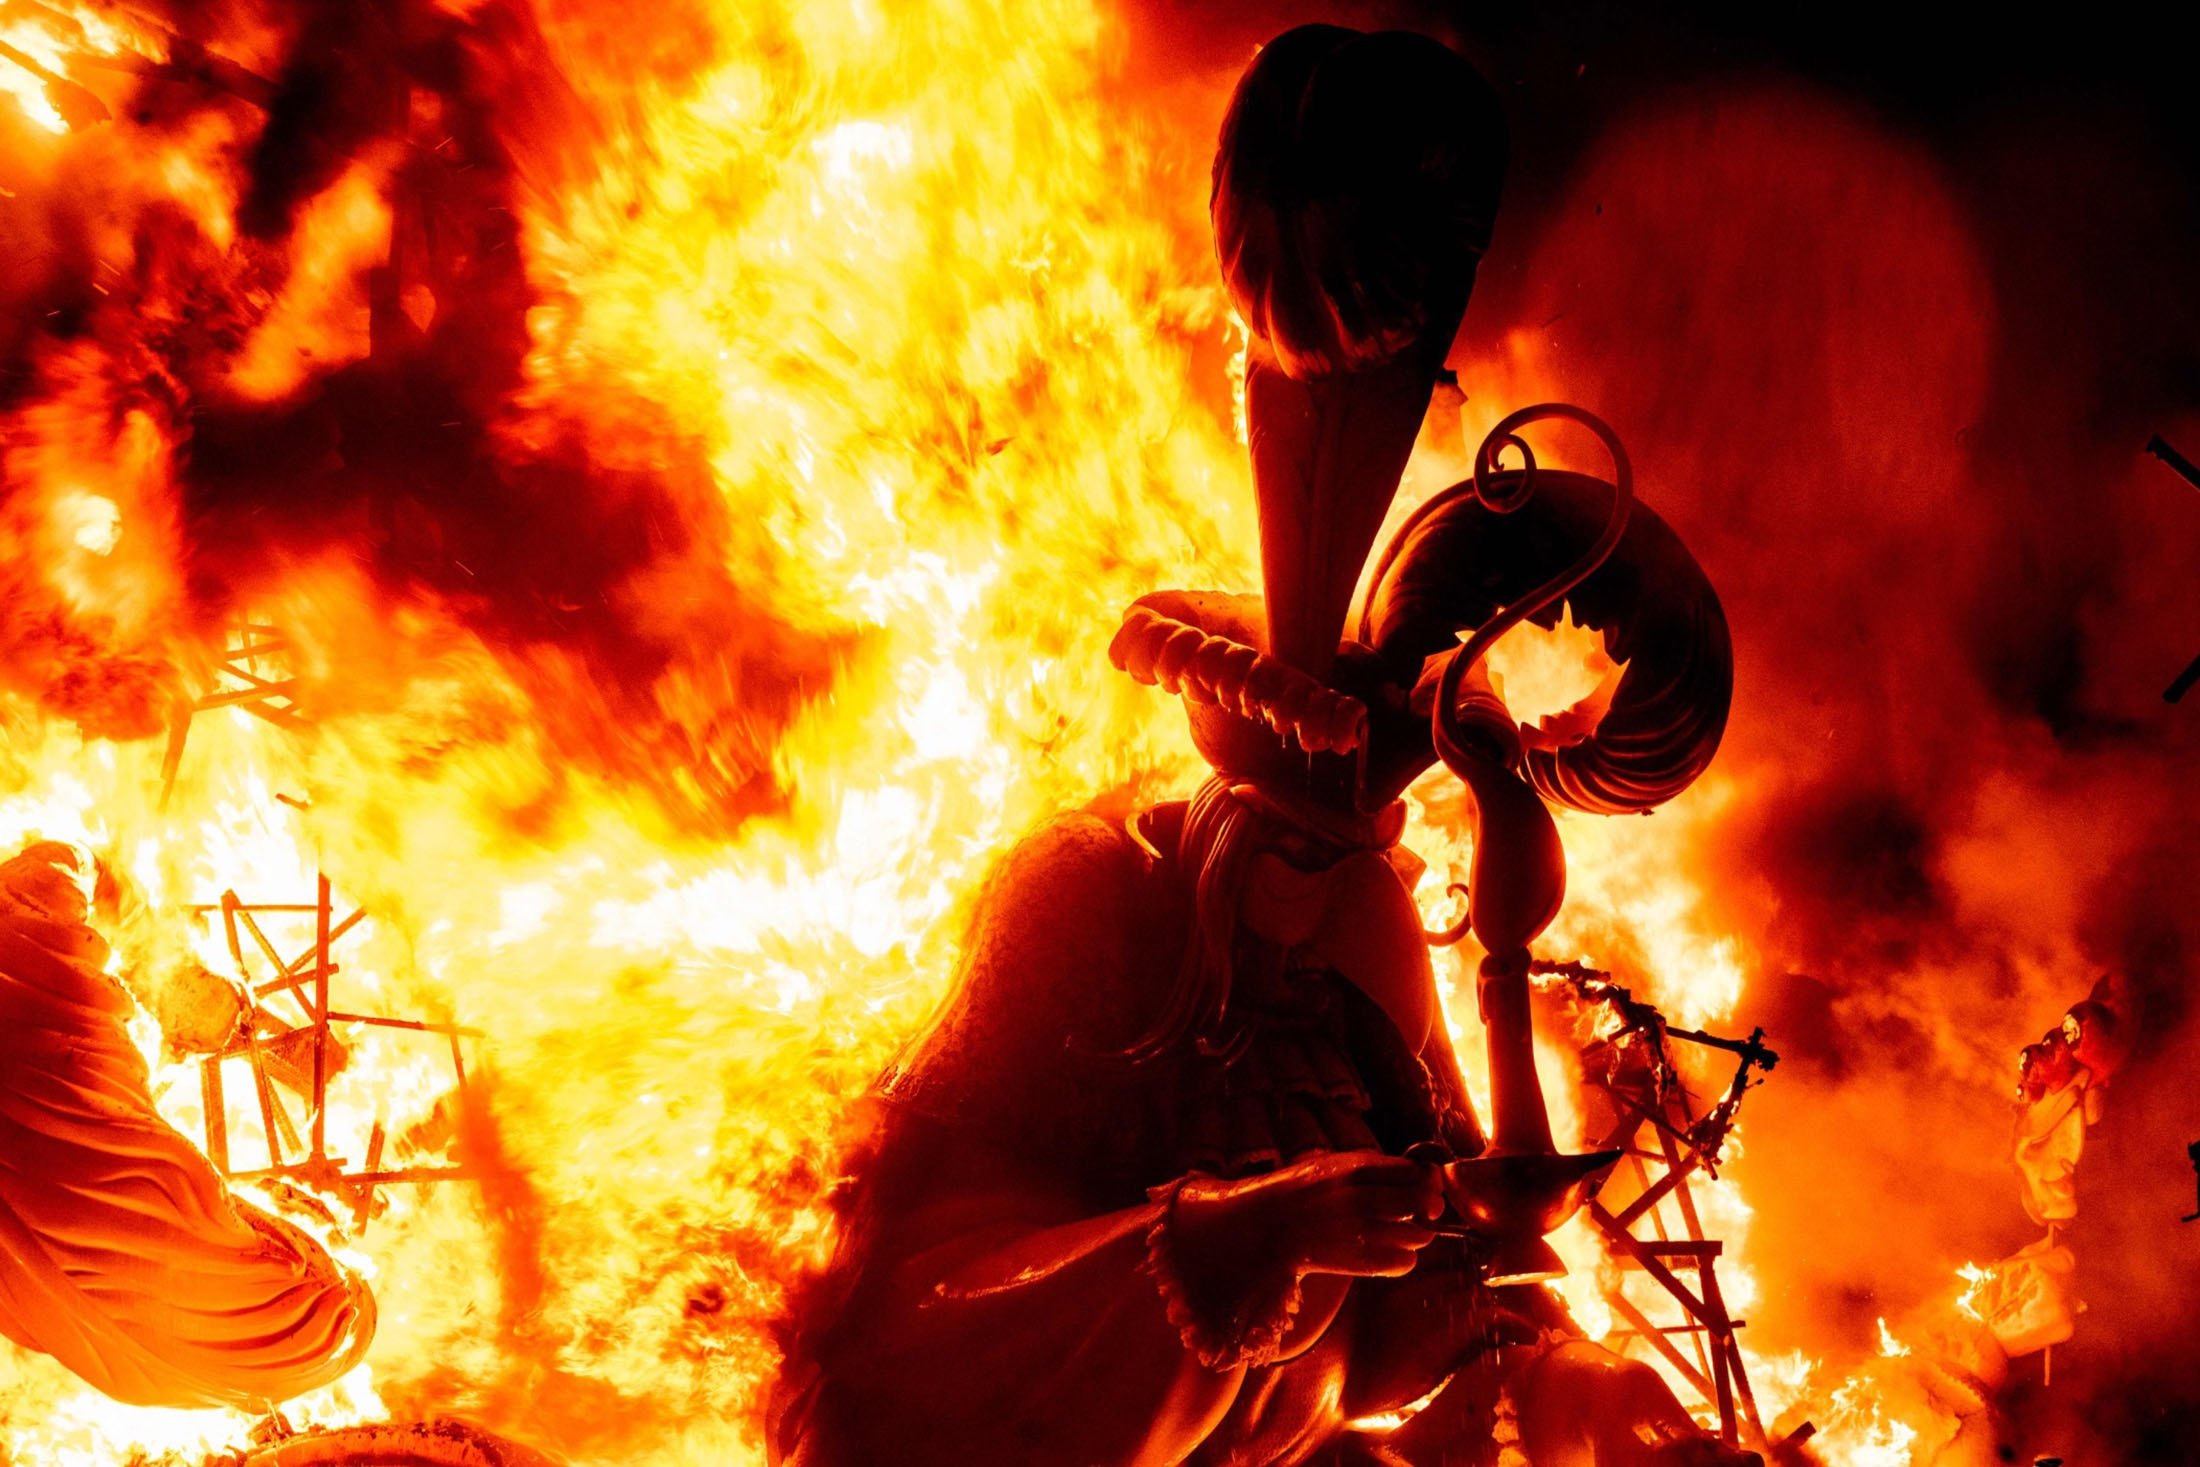 A ninot burns as an installation of the Fallas festival is set on fire during the last night of the festival in Valencia, Spain, Sept. 5, 2021. (AFP Photo)